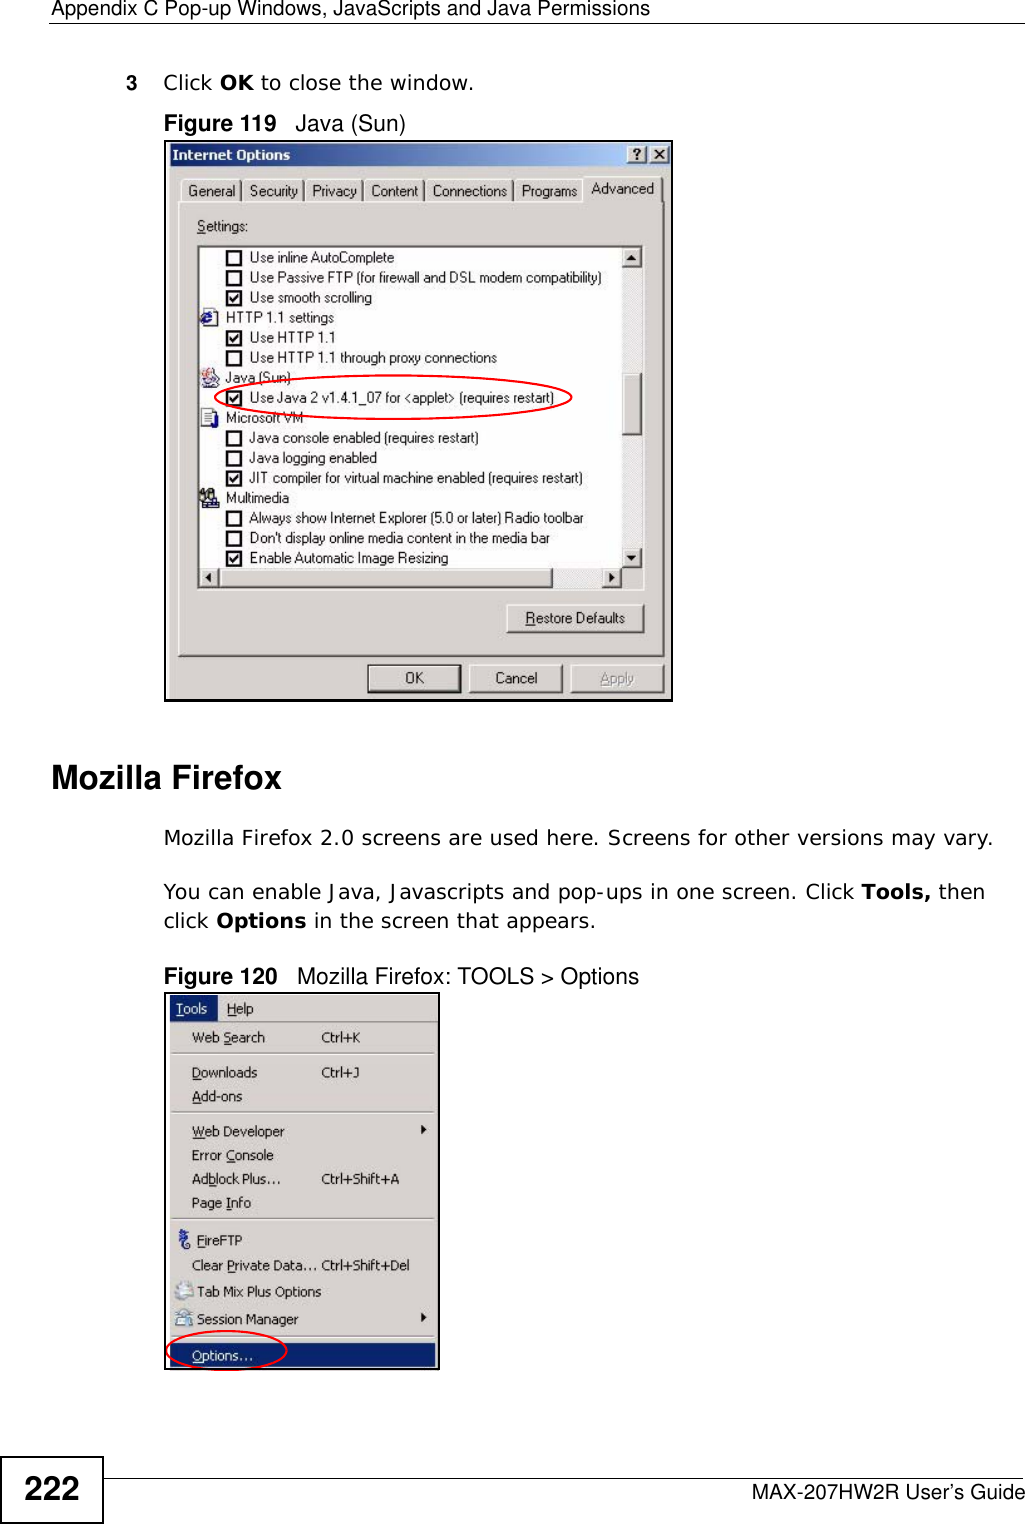 Appendix C Pop-up Windows, JavaScripts and Java PermissionsMAX-207HW2R User’s Guide2223Click OK to close the window.Figure 119   Java (Sun)Mozilla FirefoxMozilla Firefox 2.0 screens are used here. Screens for other versions may vary. You can enable Java, Javascripts and pop-ups in one screen. Click Tools, then click Options in the screen that appears.Figure 120   Mozilla Firefox: TOOLS &gt; Options